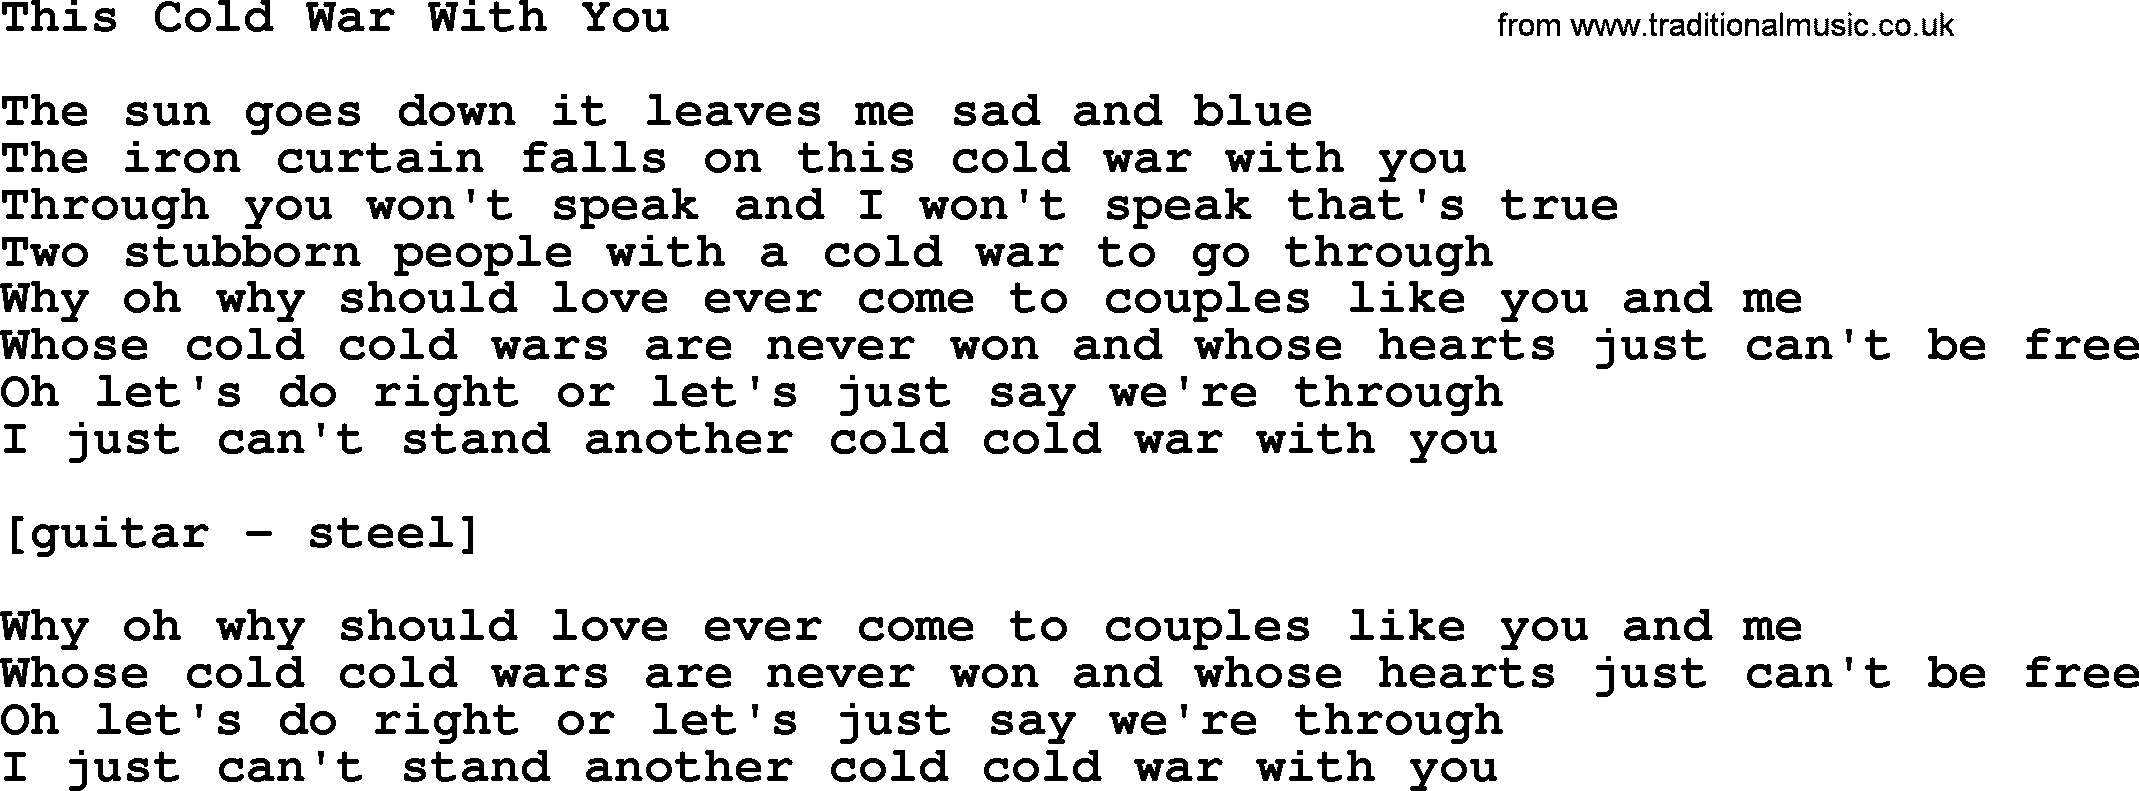 Willie Nelson song: This Cold War With You lyrics